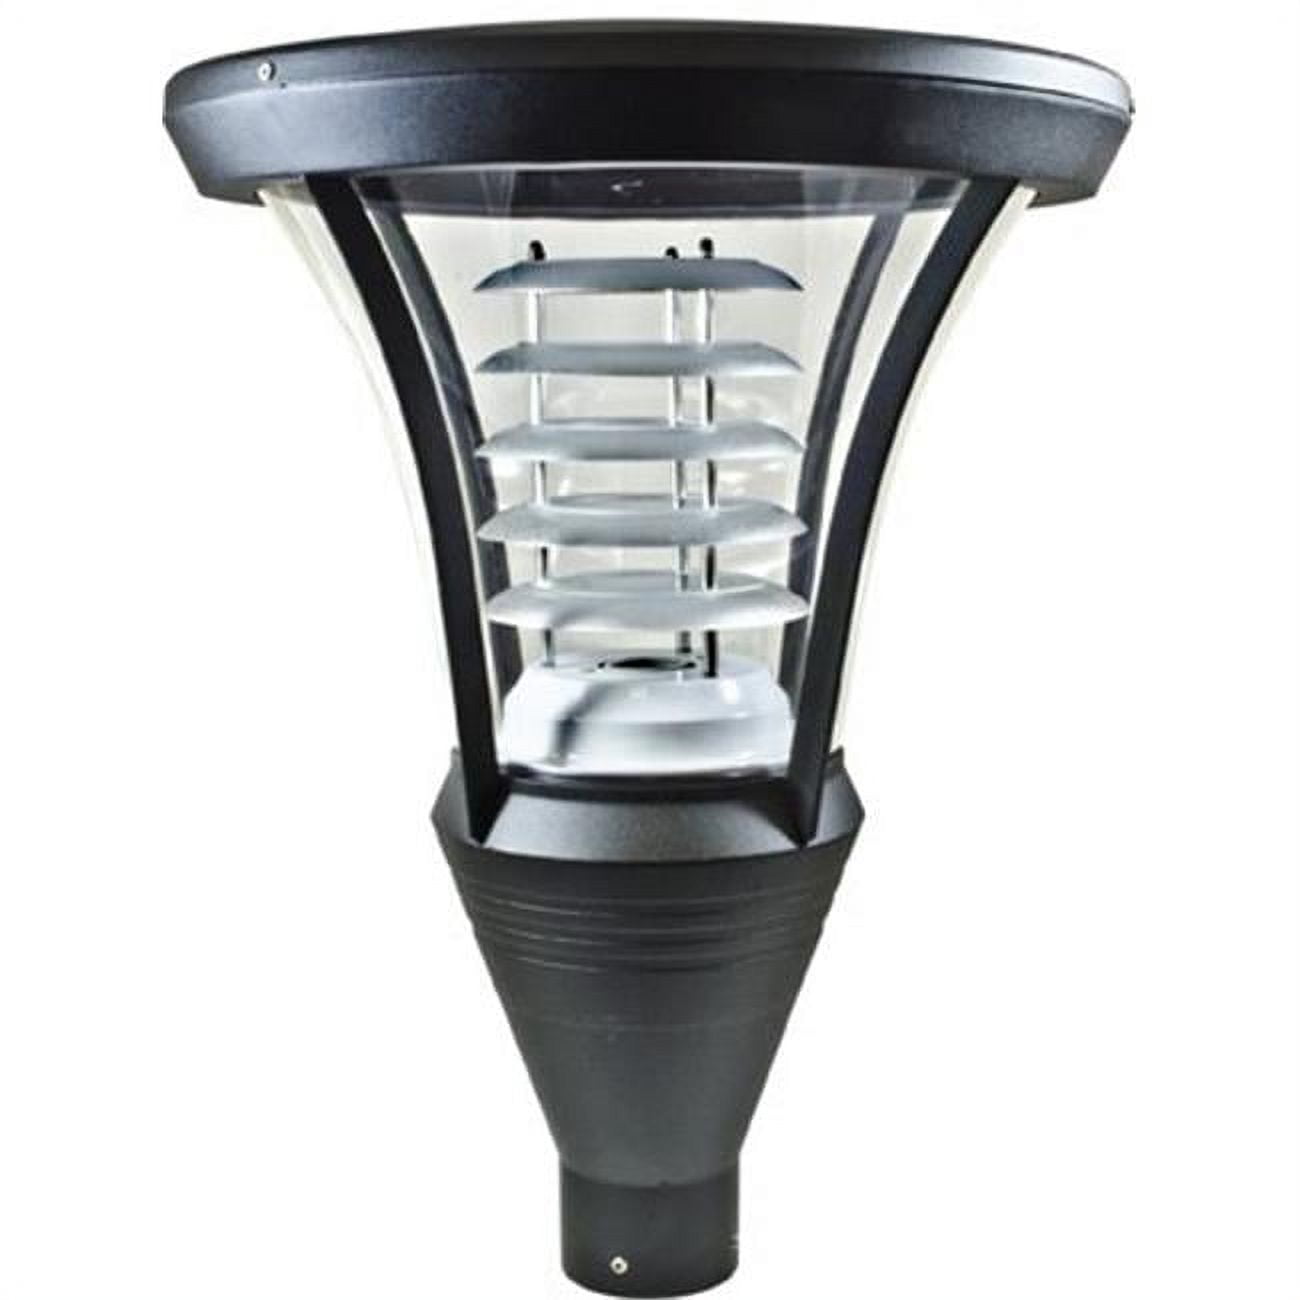 Picture of Dabmar Lighting GM641-B 35W 120V Powder Coated Cast Aluminum Post Top Light Fixture with High Pressure Sodium Lamp, Black - 22.75 x 17.25 x 17.25 in.